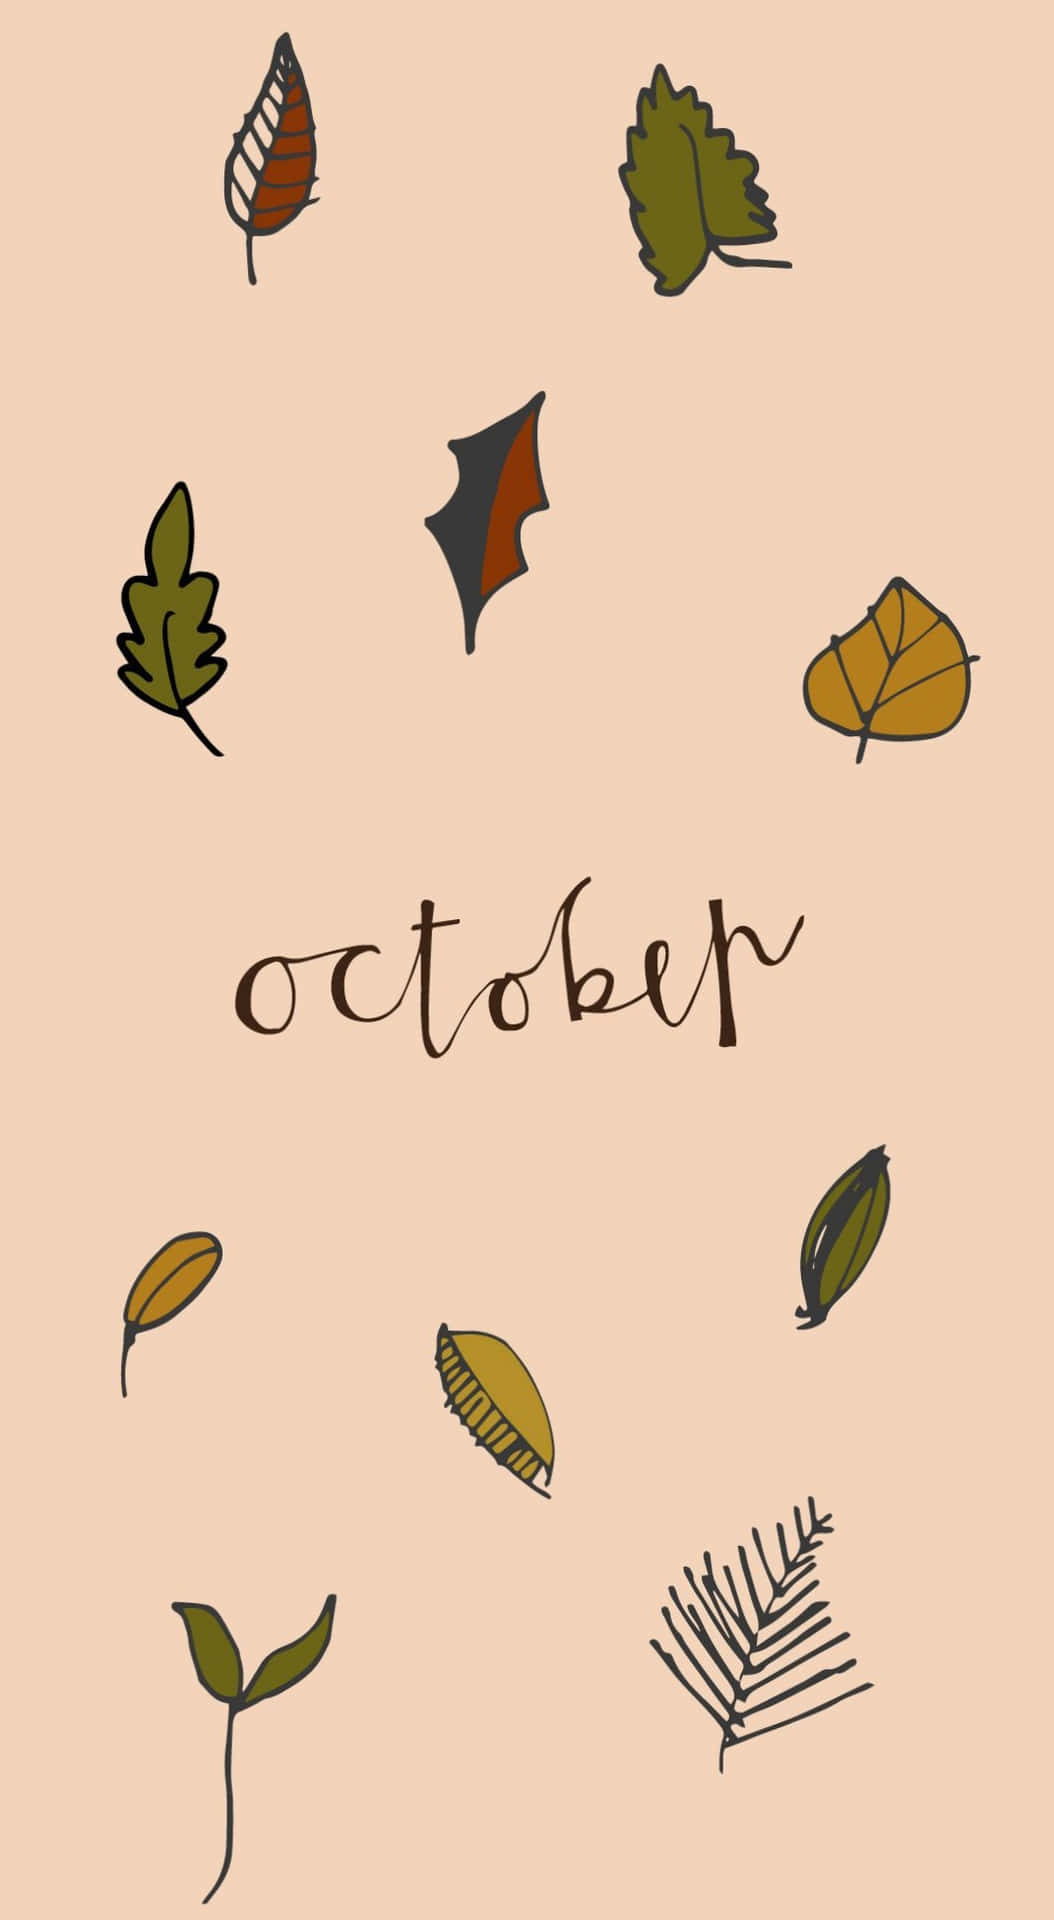 Free October Wallpaper Downloads, [200+] October Wallpapers for FREE ...